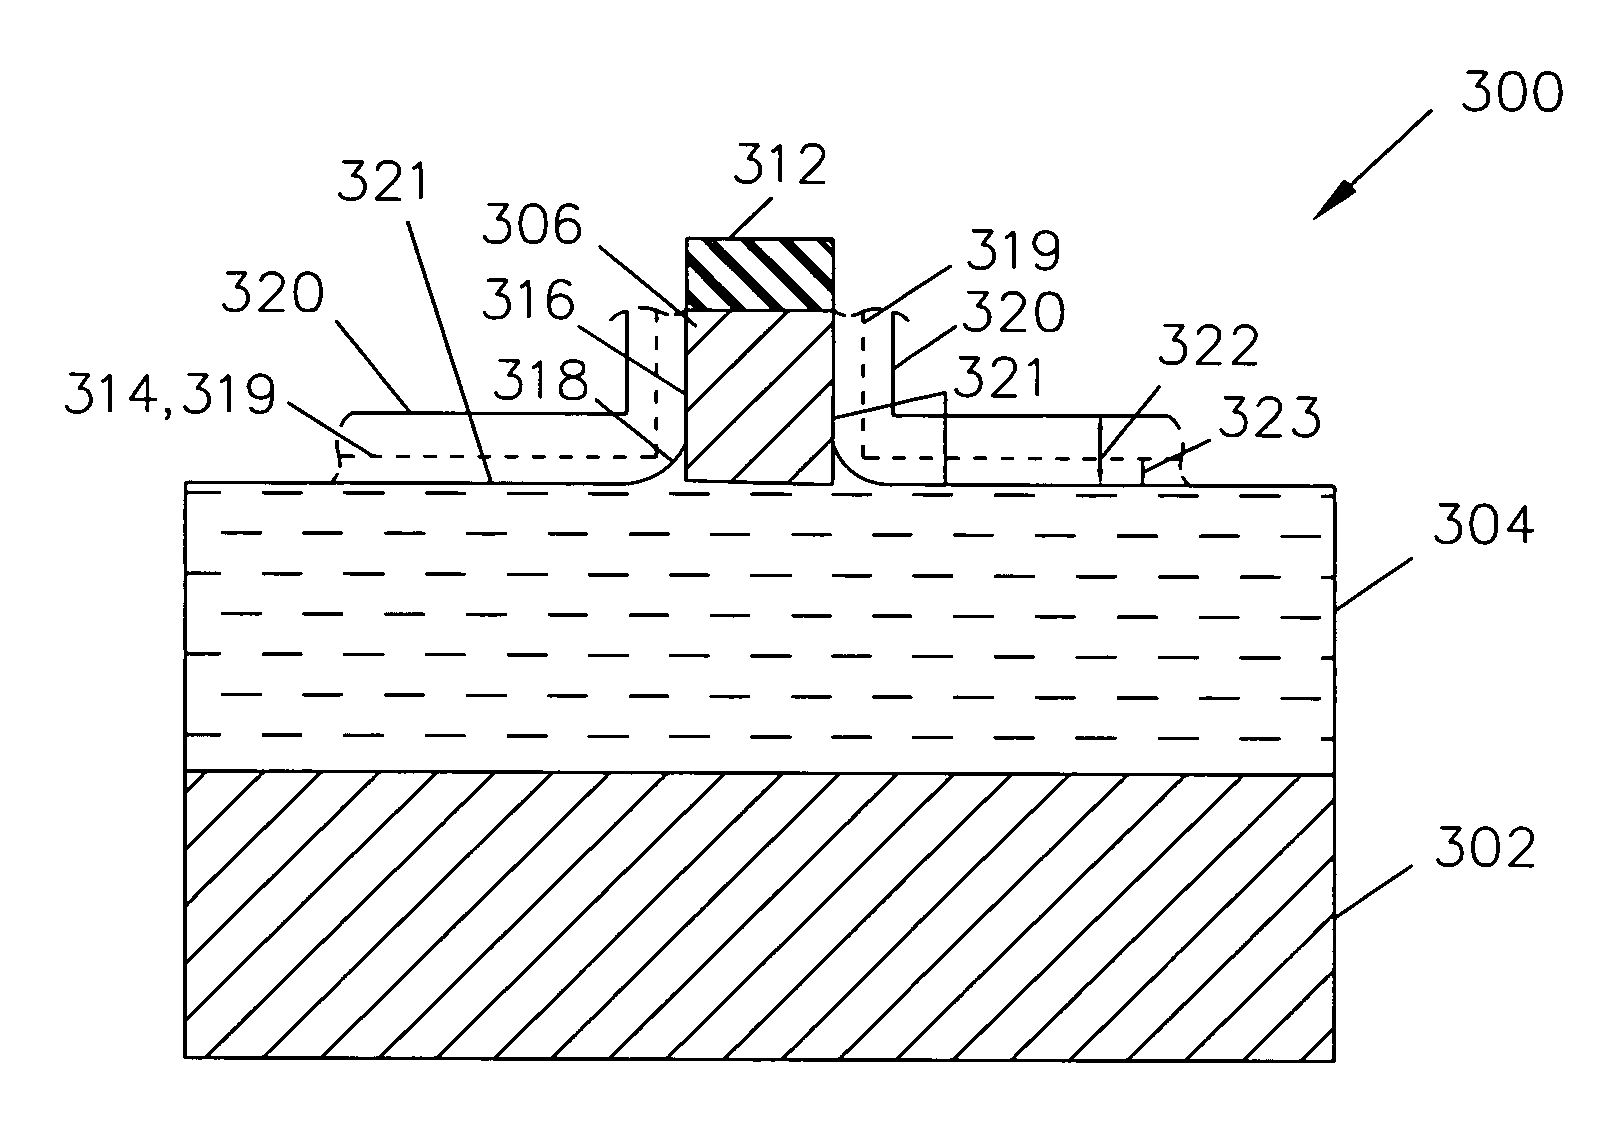 Structure and method to fabricate FinFET devices